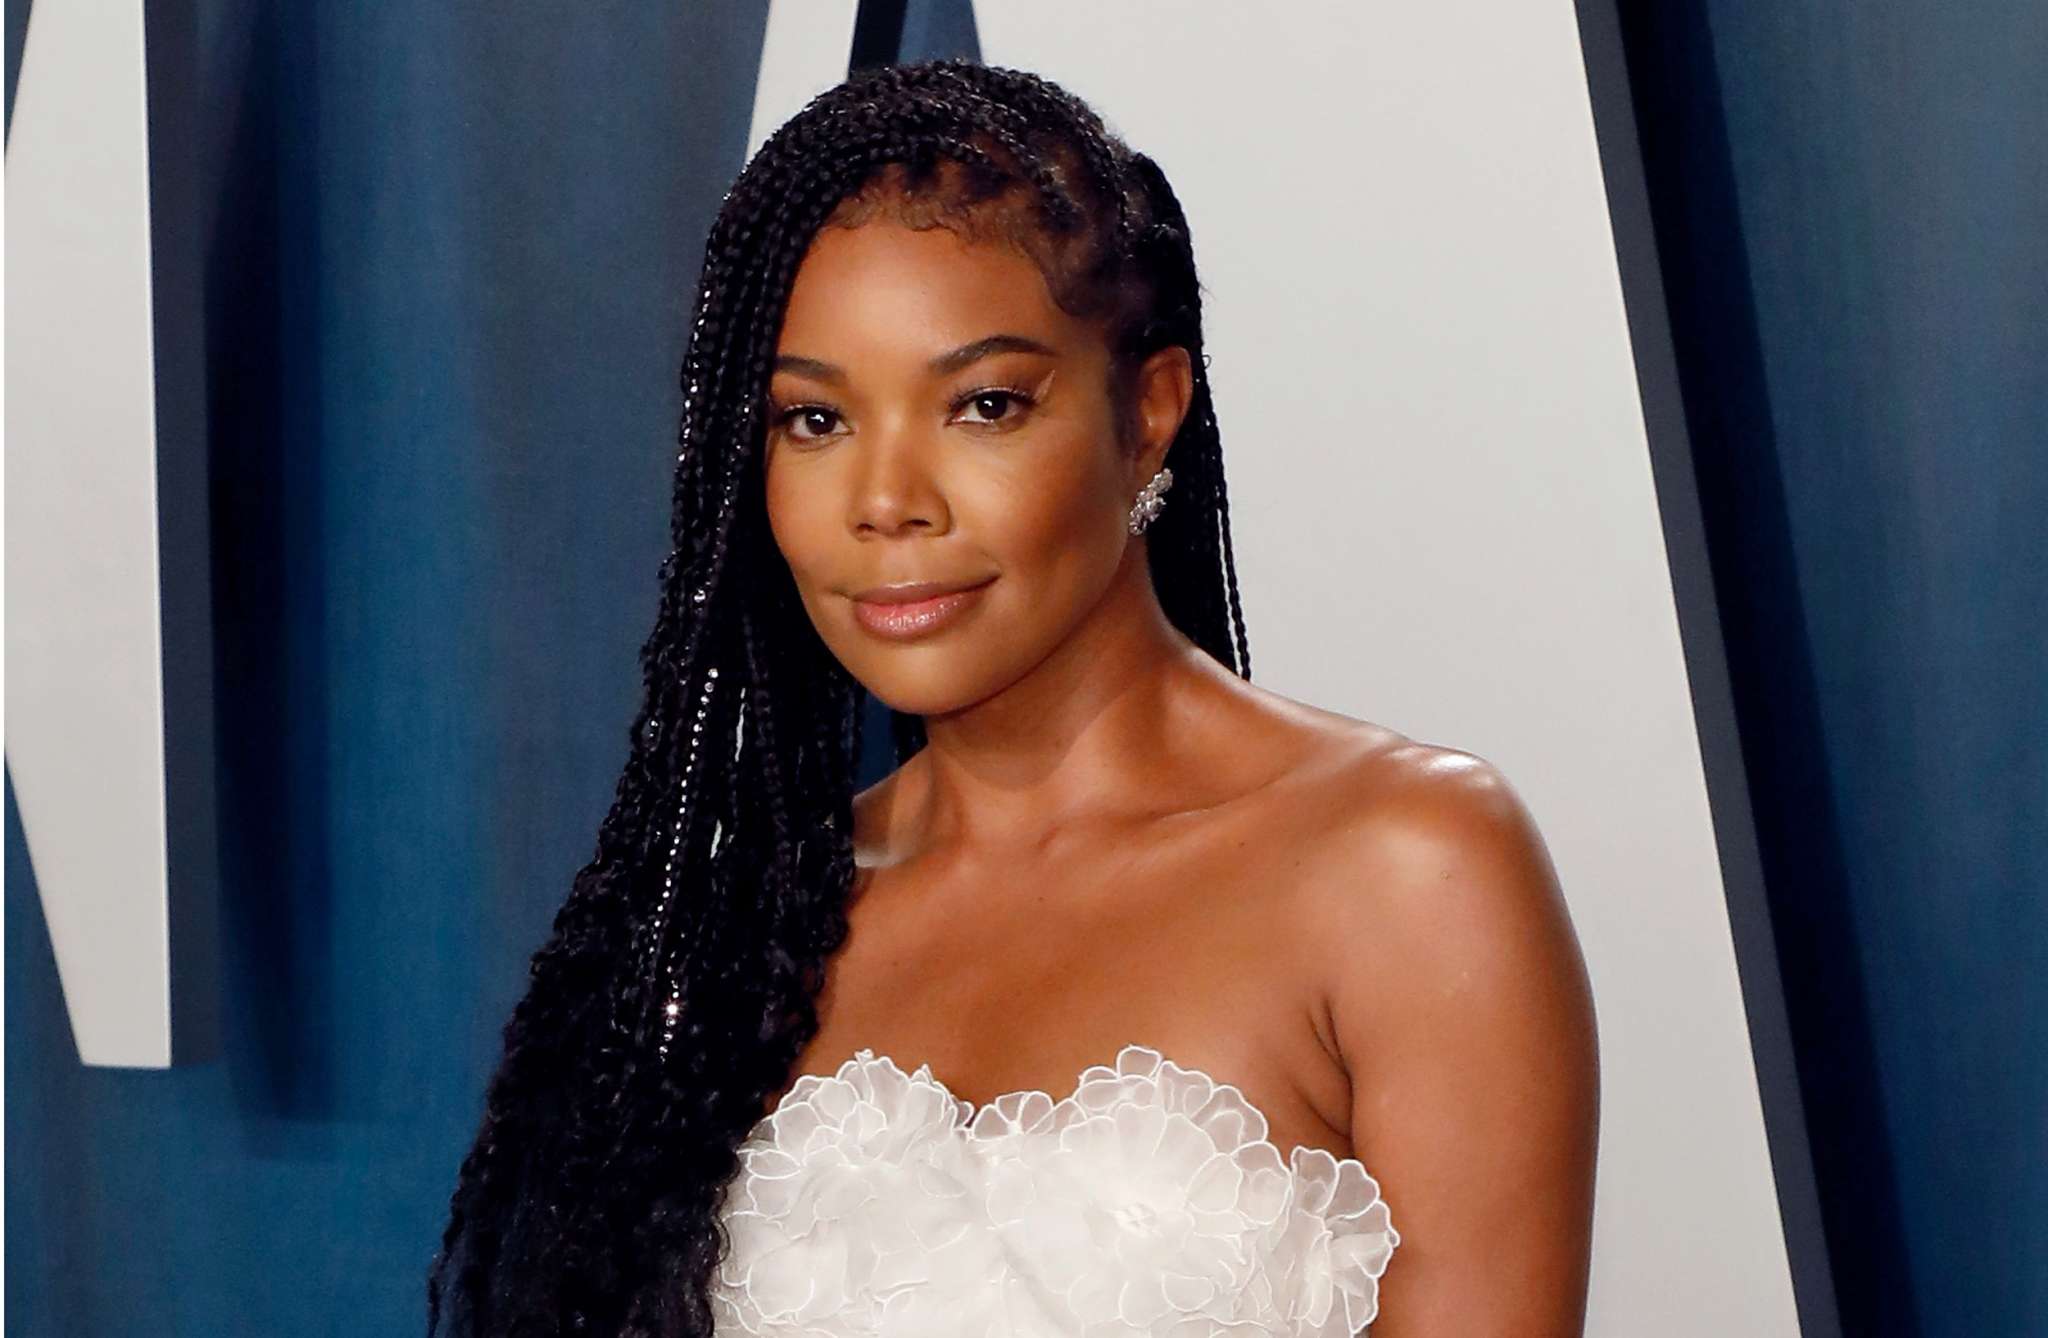 gabrielle-union-reveals-the-hardest-part-of-working-away-from-home